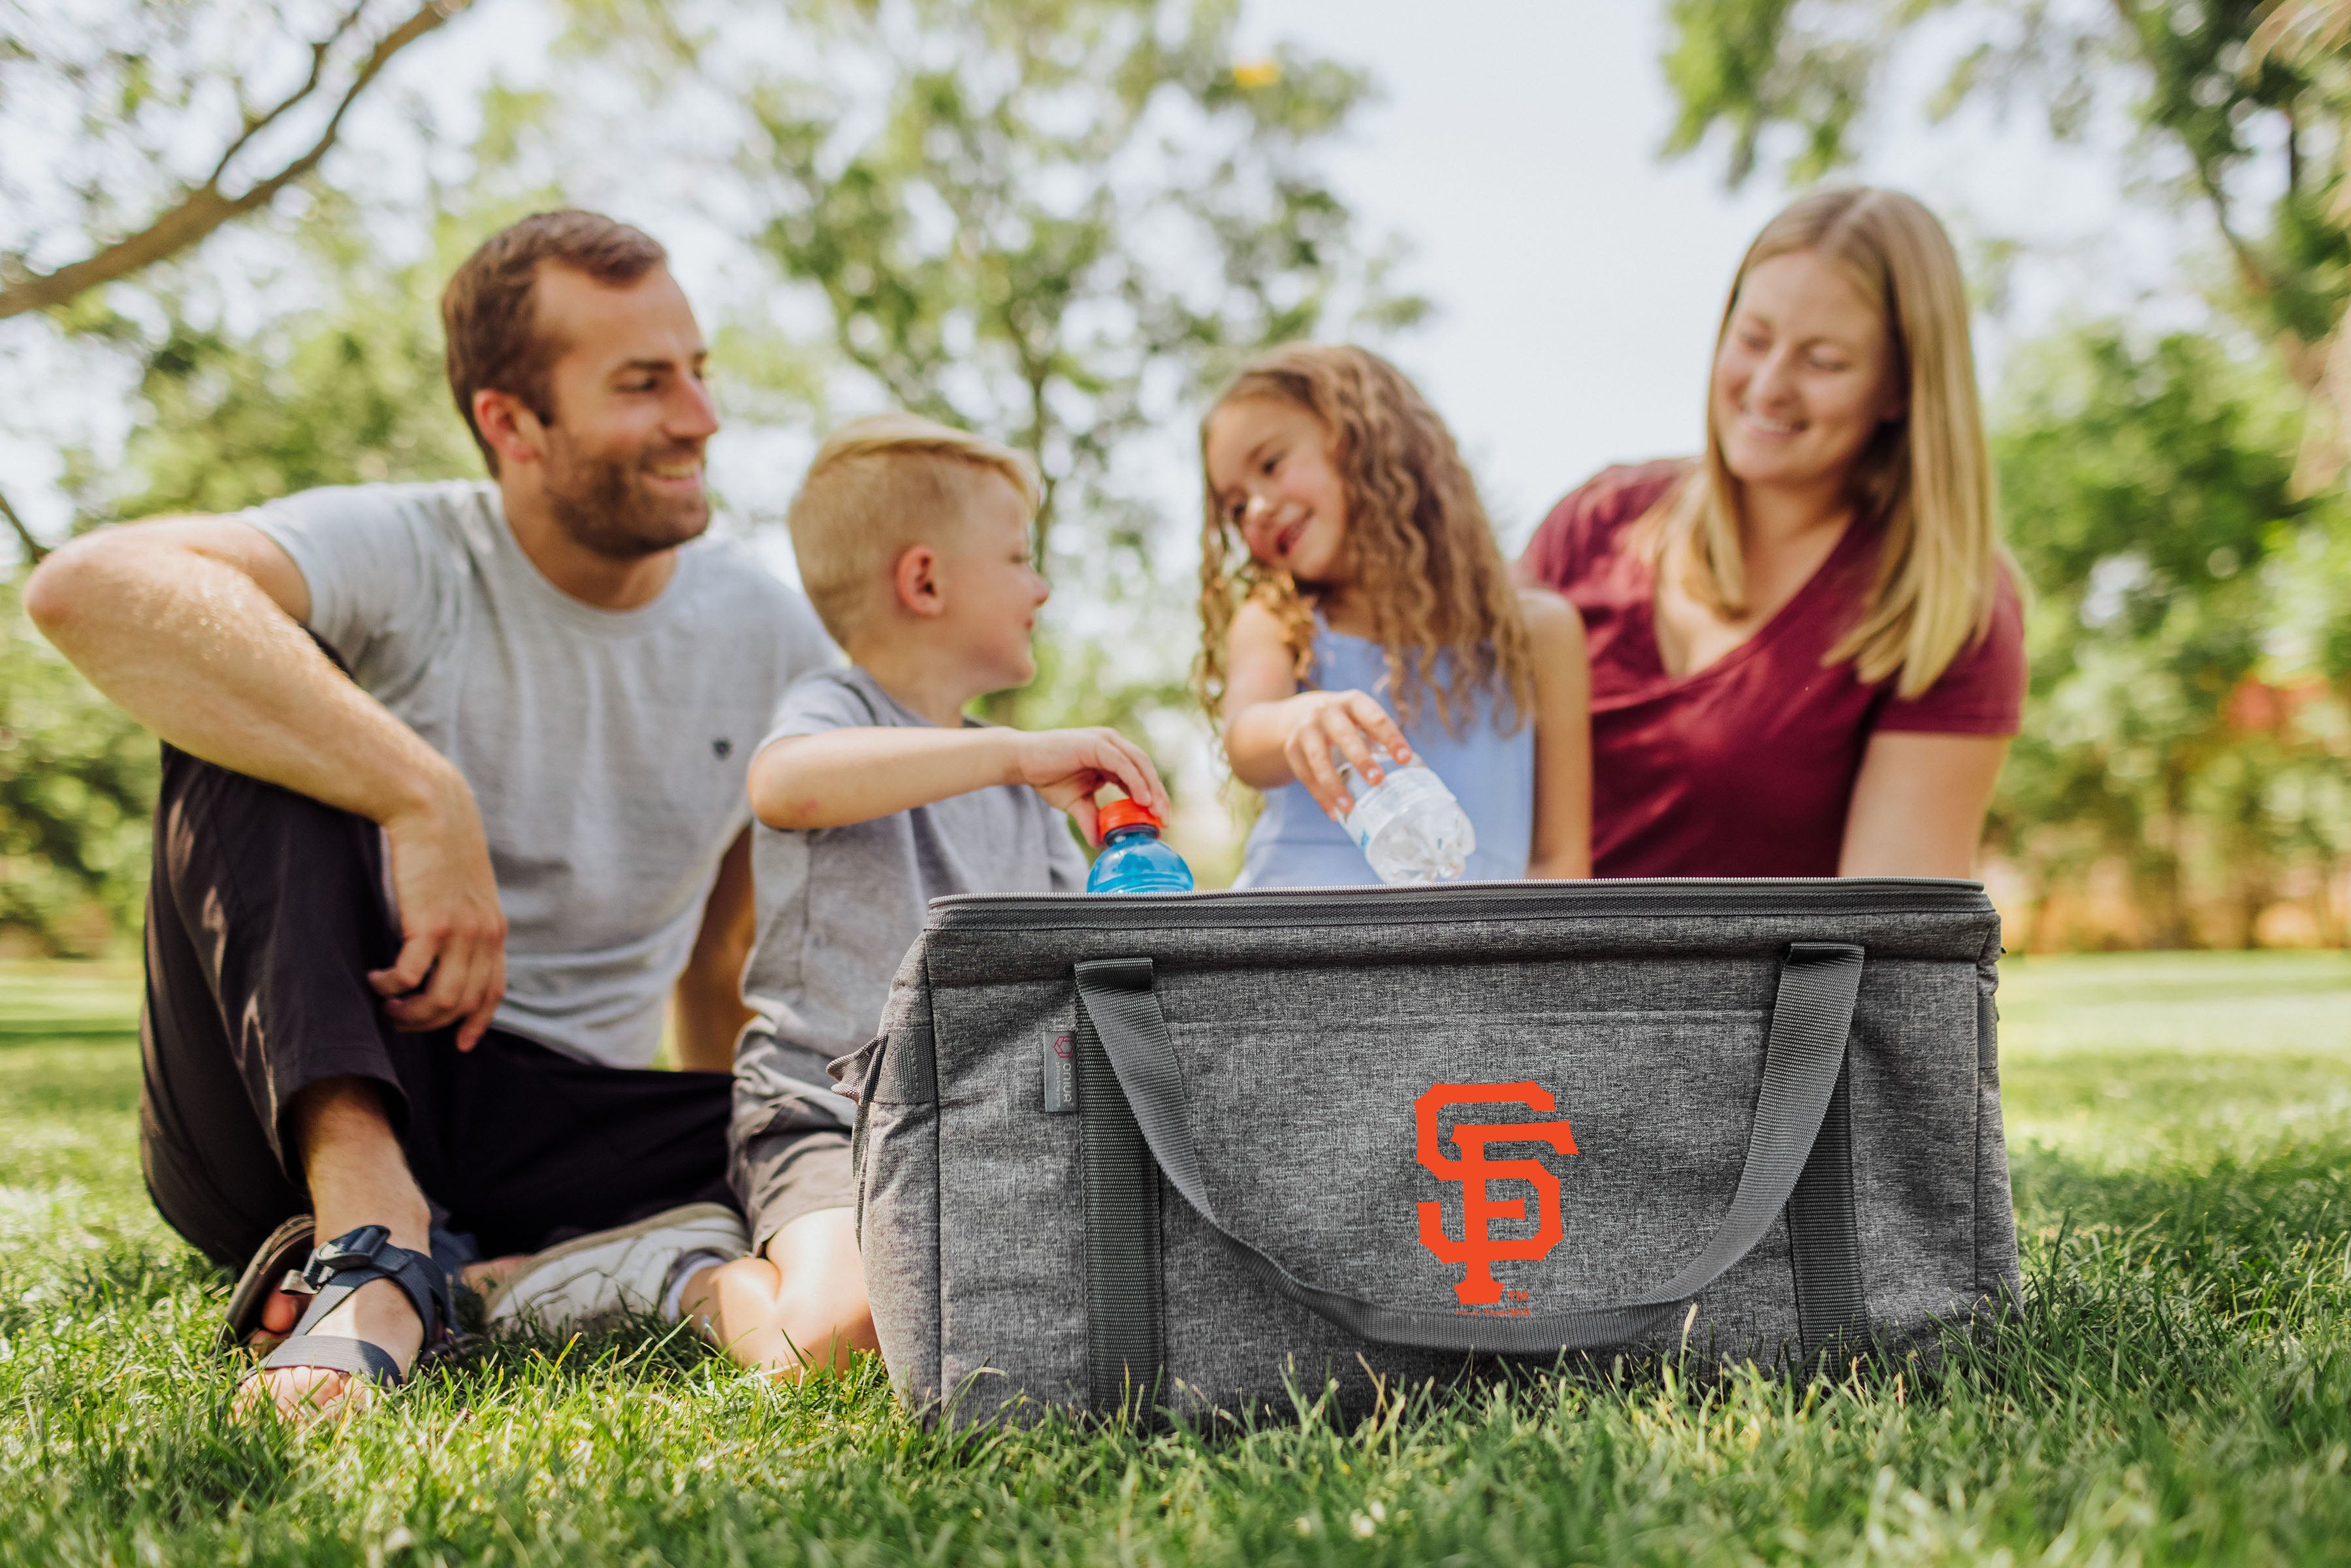 San Francisco Giants - 64 Can Collapsible Cooler